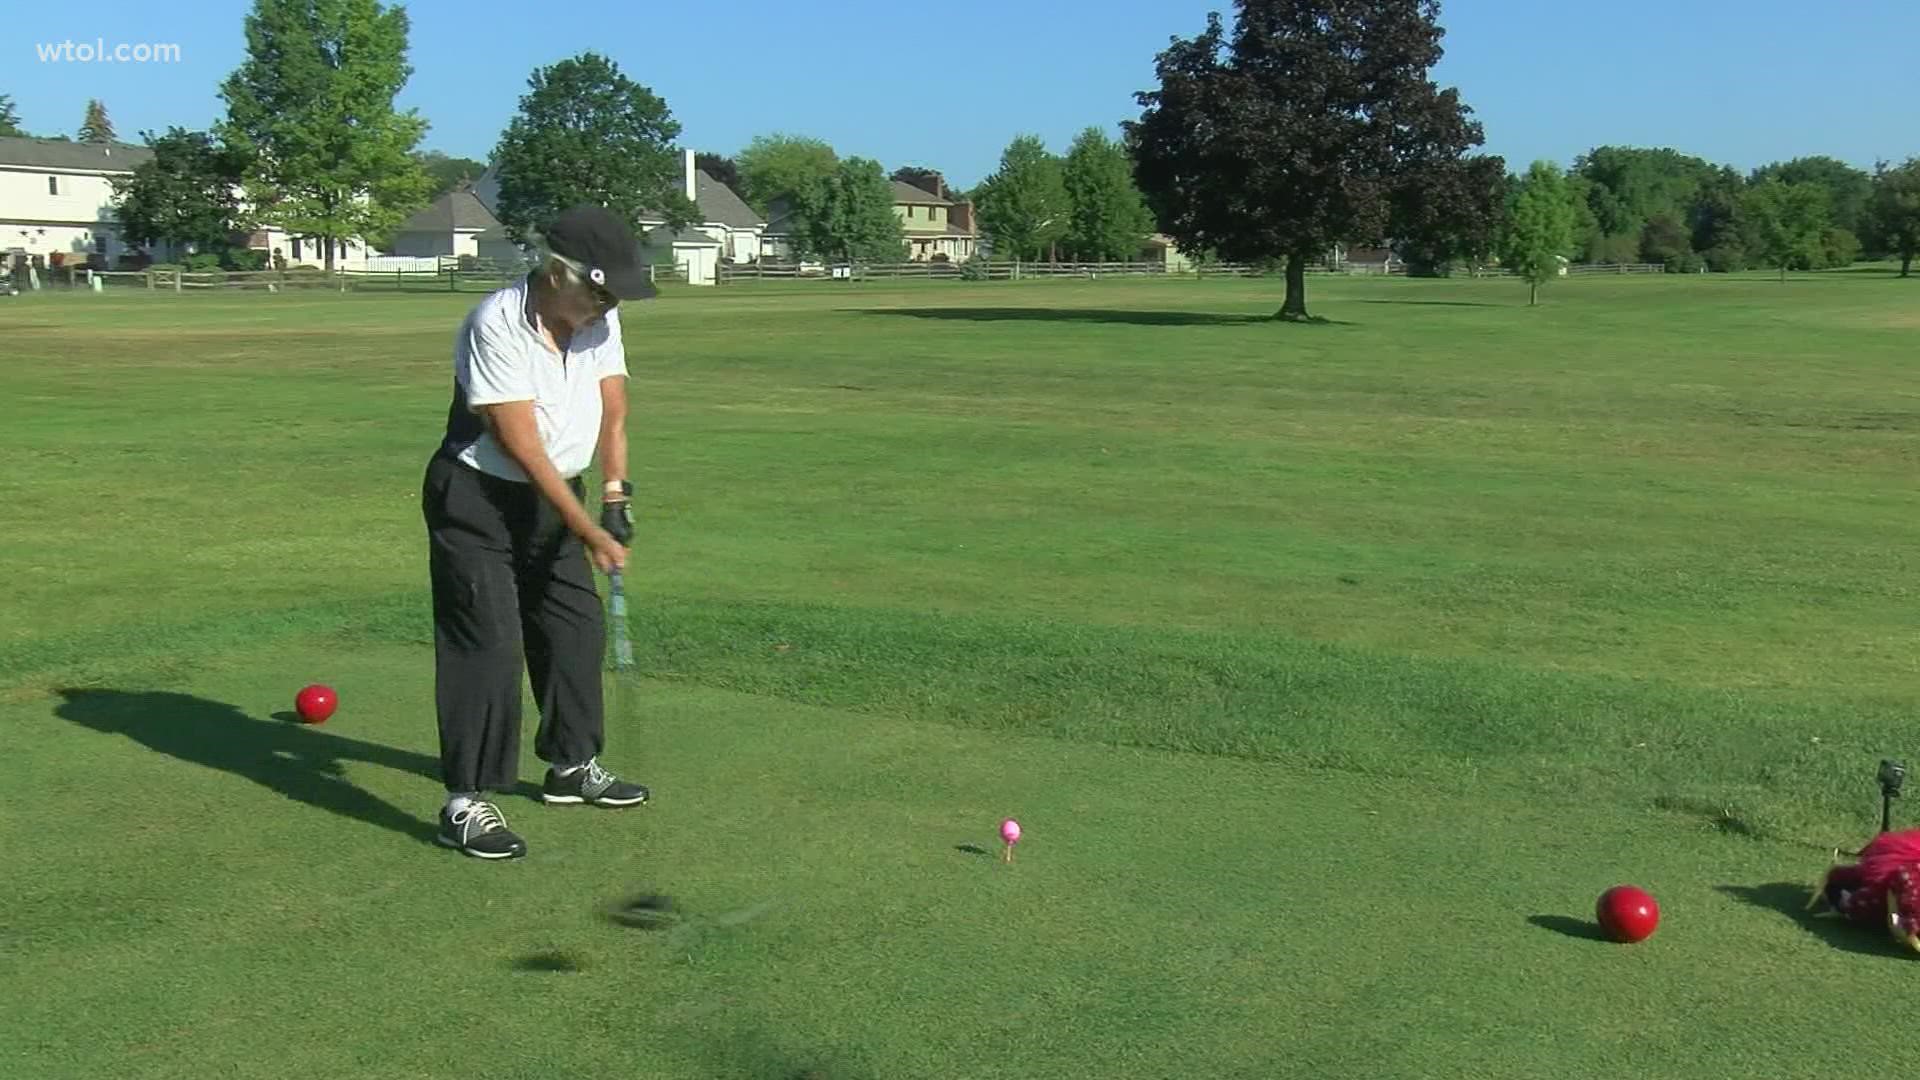 Kimiko Kawakami has been golfing for more than 60 years and hits the links multiple times a week.